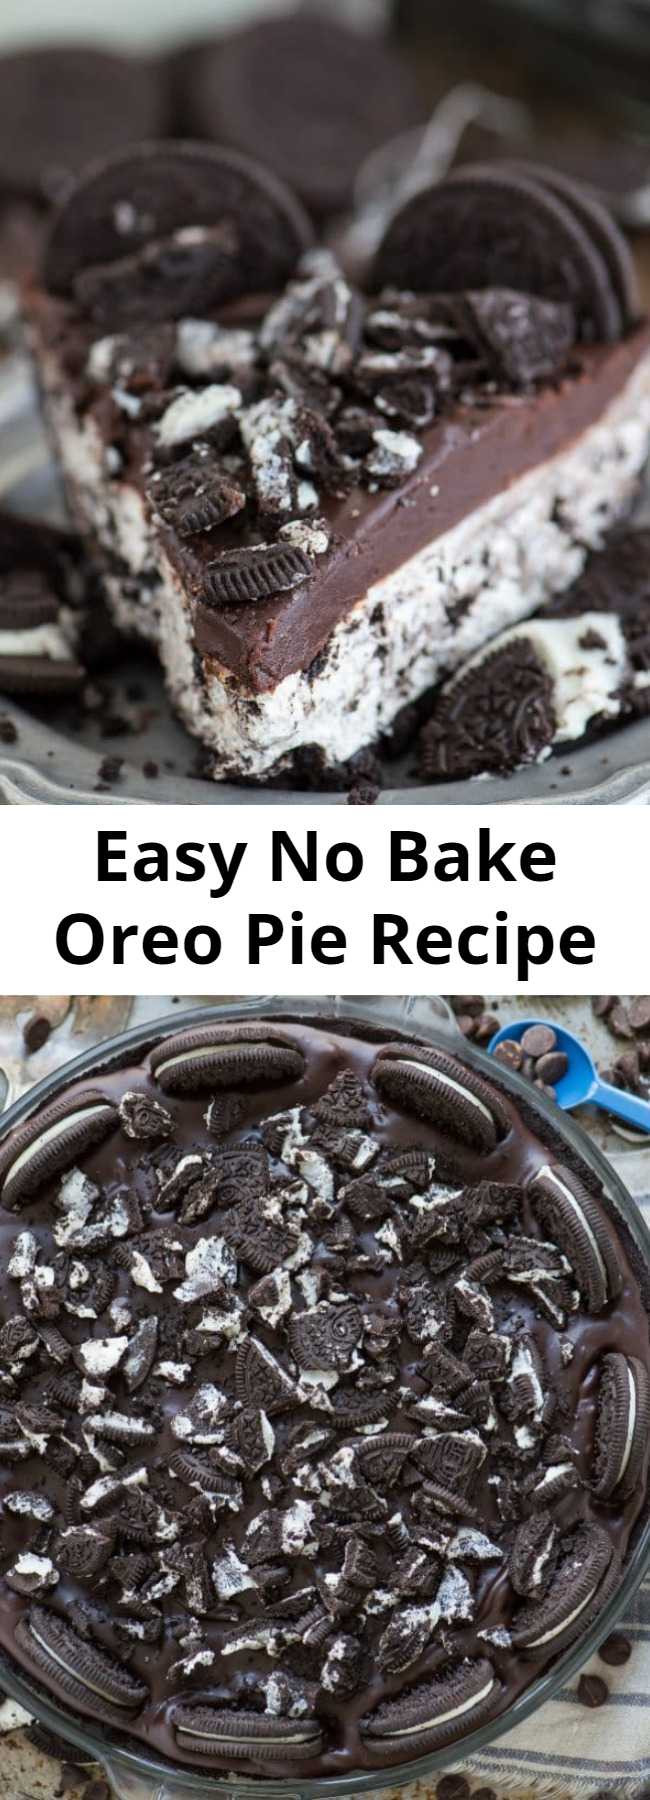 Easy No Bake Oreo Pie Recipe - The best no bake oreo pie! Oreo crust, oreo cream cheese filling, chocolate ganache topped with oreos!! The question is.. is there such a thing as too many oreos? I think not :) #oreopie #nobakeoreopie